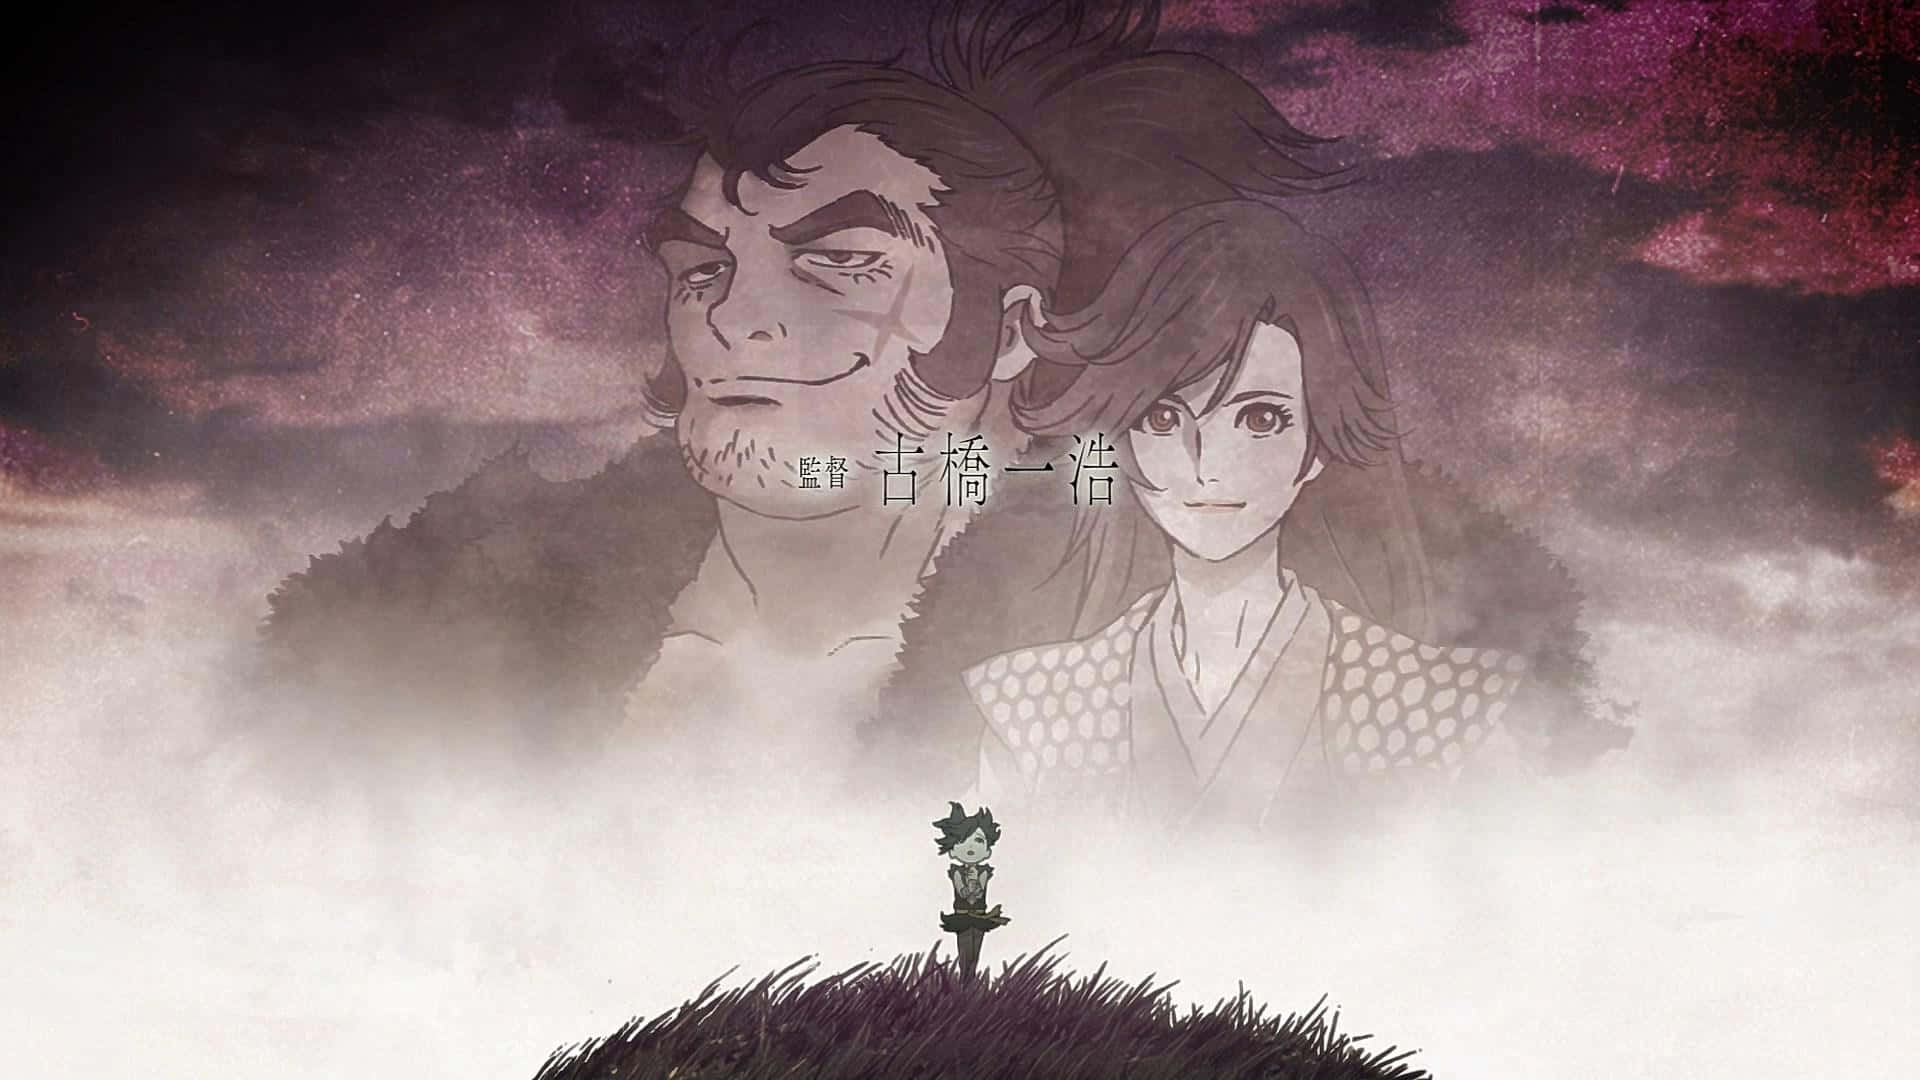 "Experience a surreal world of dark magic and monsters with Dororo".